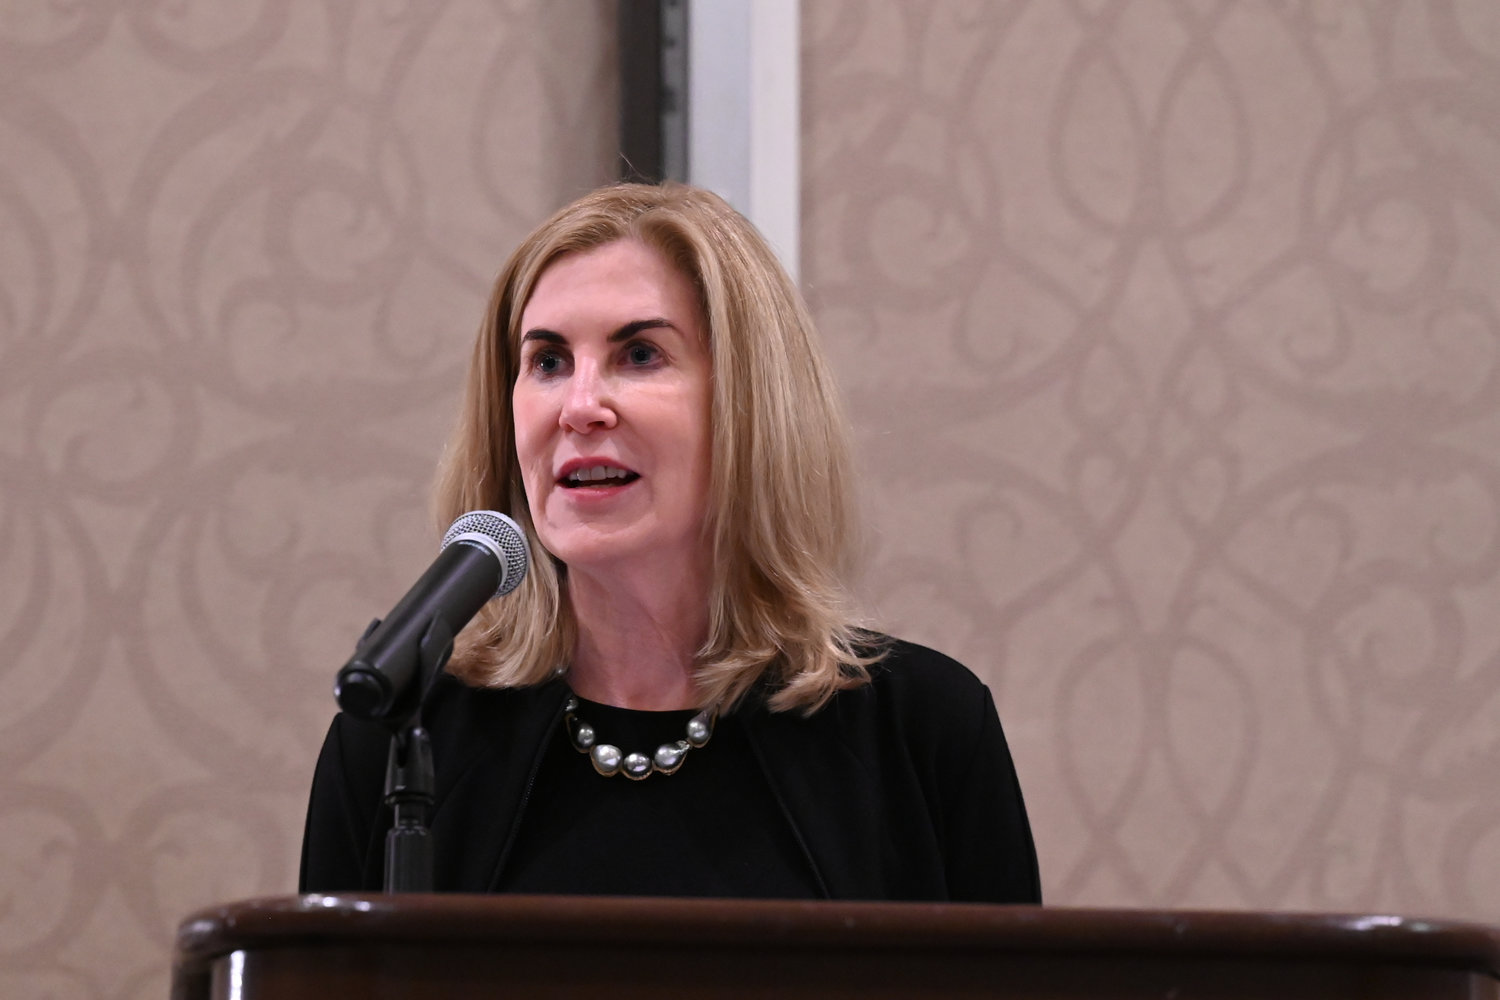 Lissa Walls Cribb, CEO of Southern Newspapers, announced the recipients of the 2022 Carmage Walls Commentary Prize, named in honor of her father, the late Benjamin Carmage Walls. The award recognizes courageous, outstanding commentary on local issues. (Photo by Jeff Strout)